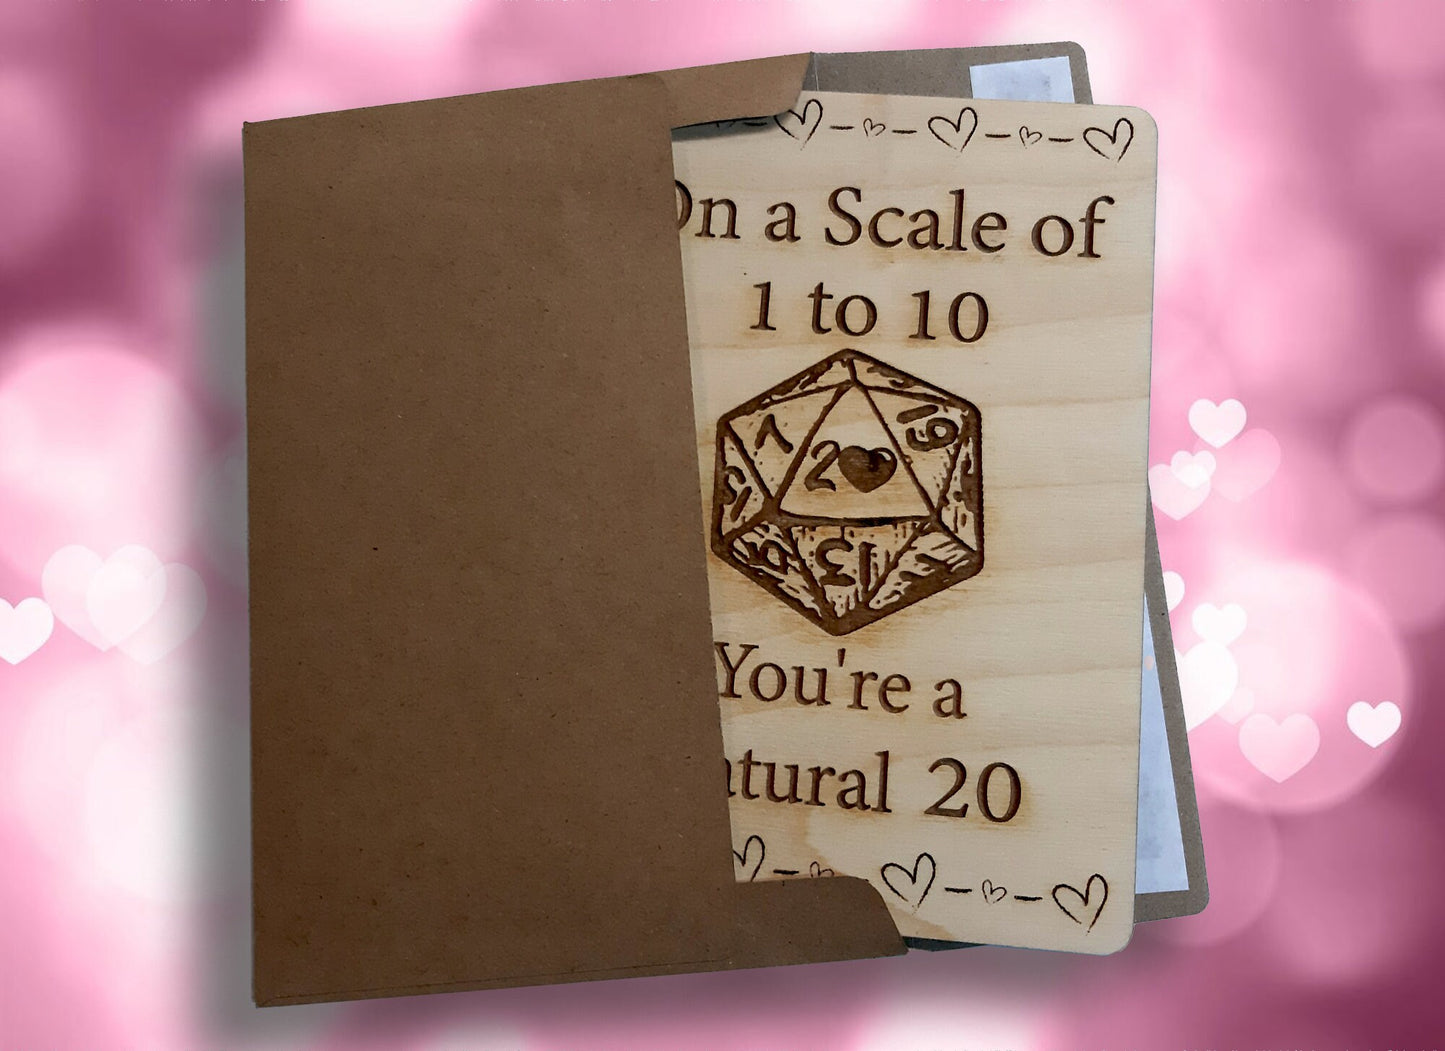 Valentine/Anniversary Card -Natural 20 RPG Gaming Clever card, engraved wood, gamer gift, rpg, role-playing games d&d dnd